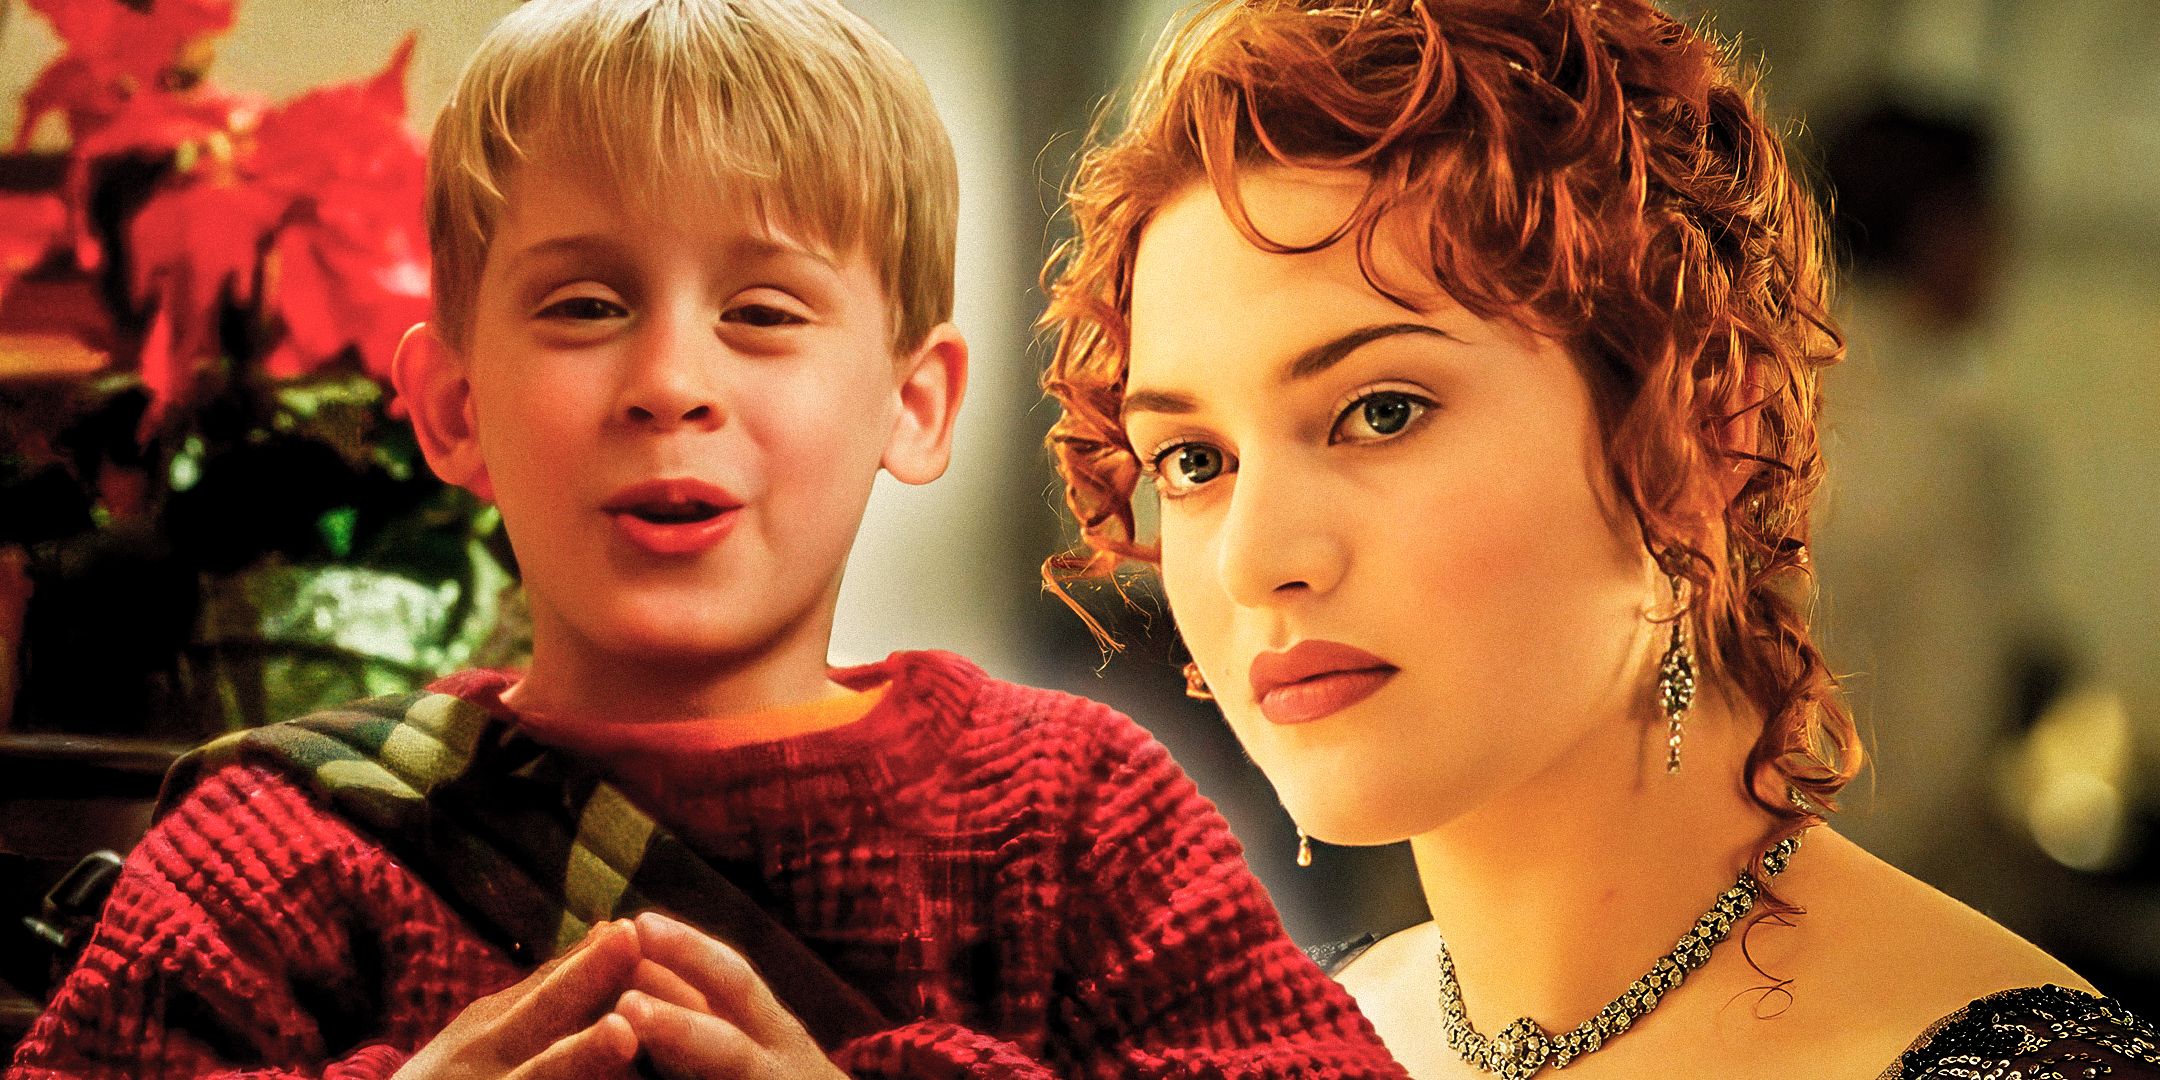 Kate-Winslet-as-Rose-Dewitt-Bukater-from-Titanic-and-Macaulay-Culkin-as-Kevin-from-Home-Alone